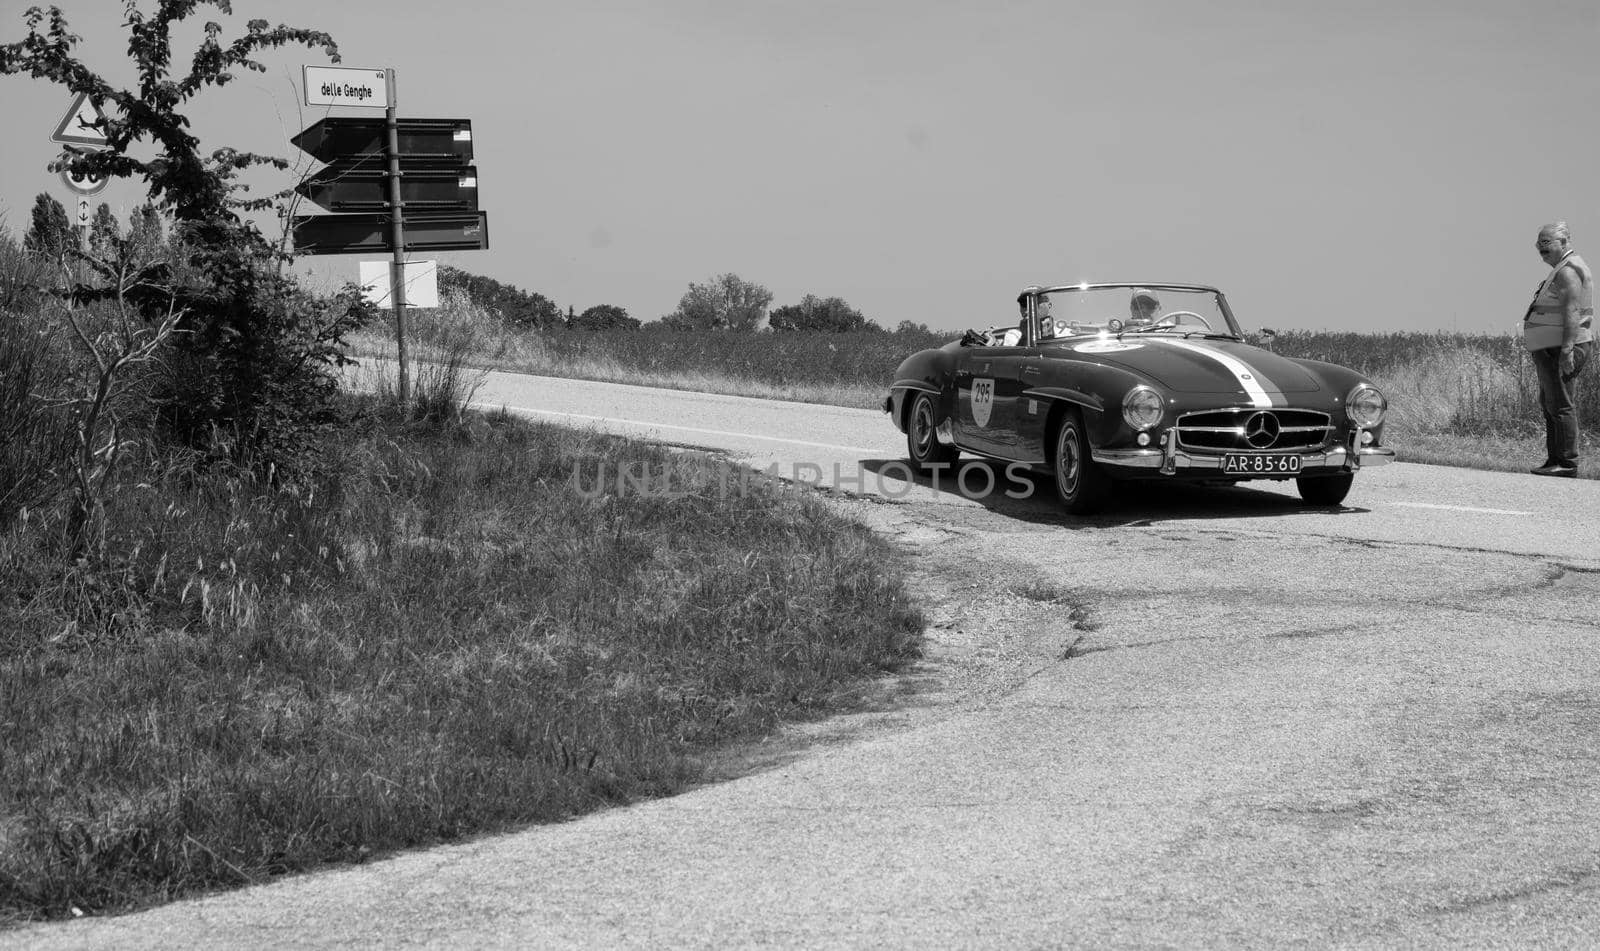 MERCEDES-BENZ 190 SL 1957 on an old racing car in rally Mille Miglia 2022 the famous italian historical race (1927-1957 by massimocampanari